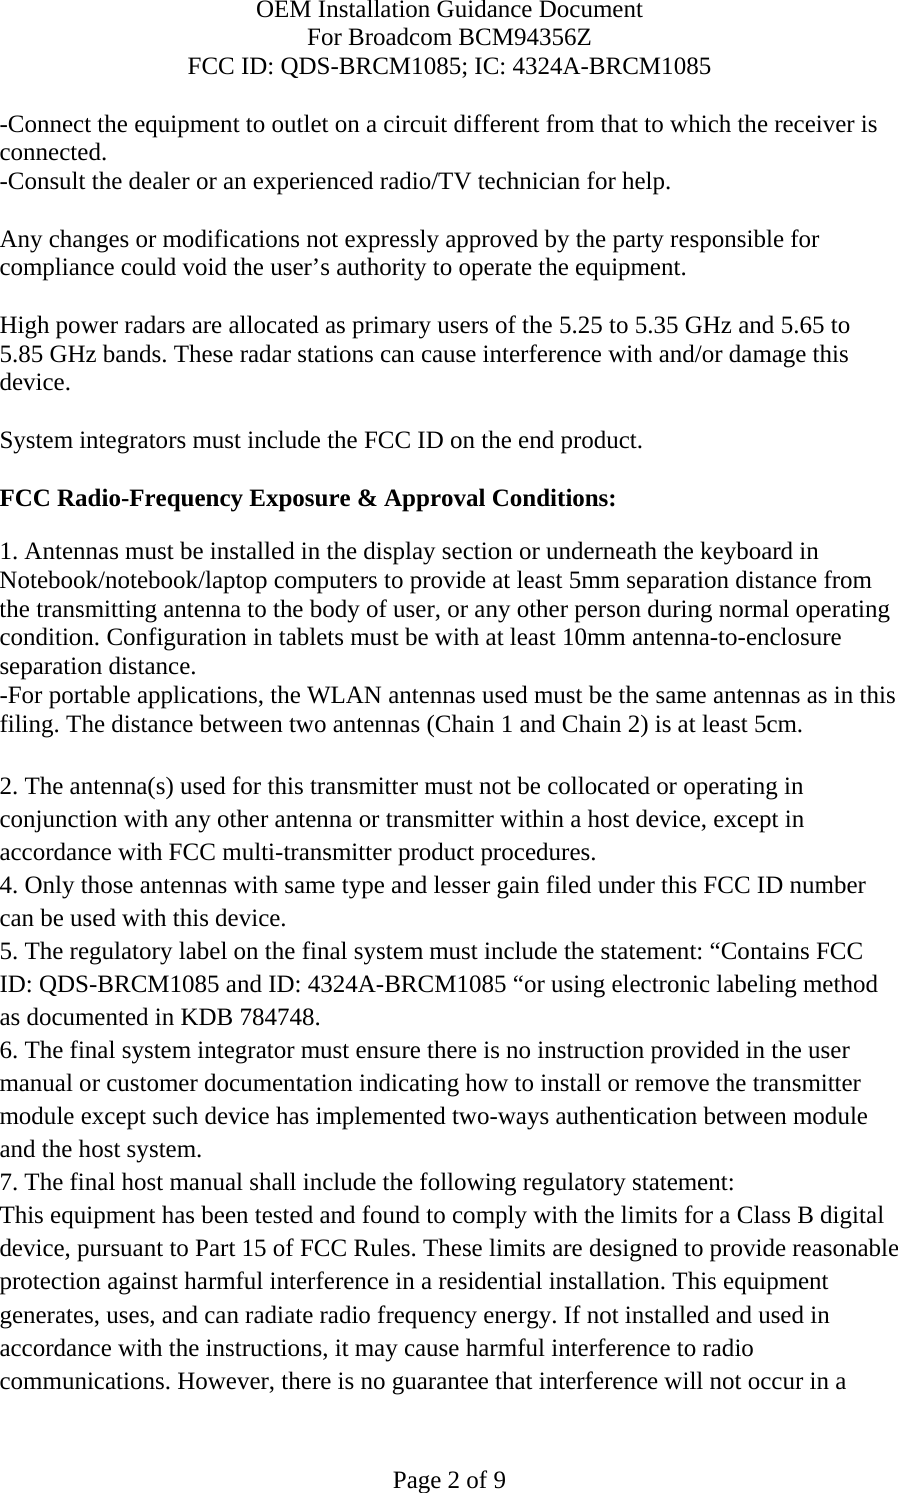 OEM Installation Guidance Document For Broadcom BCM94356Z FCC ID: QDS-BRCM1085; IC: 4324A-BRCM1085  Page 2 of 9 -Connect the equipment to outlet on a circuit different from that to which the receiver is connected. -Consult the dealer or an experienced radio/TV technician for help.  Any changes or modifications not expressly approved by the party responsible for compliance could void the user’s authority to operate the equipment.  High power radars are allocated as primary users of the 5.25 to 5.35 GHz and 5.65 to 5.85 GHz bands. These radar stations can cause interference with and/or damage this device.  System integrators must include the FCC ID on the end product.   FCC Radio-Frequency Exposure &amp; Approval Conditions: 1. Antennas must be installed in the display section or underneath the keyboard in Notebook/notebook/laptop computers to provide at least 5mm separation distance from the transmitting antenna to the body of user, or any other person during normal operating condition. Configuration in tablets must be with at least 10mm antenna-to-enclosure separation distance. -For portable applications, the WLAN antennas used must be the same antennas as in this filing. The distance between two antennas (Chain 1 and Chain 2) is at least 5cm.  2. The antenna(s) used for this transmitter must not be collocated or operating in conjunction with any other antenna or transmitter within a host device, except in accordance with FCC multi-transmitter product procedures. 4. Only those antennas with same type and lesser gain filed under this FCC ID number can be used with this device. 5. The regulatory label on the final system must include the statement: “Contains FCC ID: QDS-BRCM1085 and ID: 4324A-BRCM1085 “or using electronic labeling method as documented in KDB 784748. 6. The final system integrator must ensure there is no instruction provided in the user manual or customer documentation indicating how to install or remove the transmitter module except such device has implemented two-ways authentication between module and the host system. 7. The final host manual shall include the following regulatory statement: This equipment has been tested and found to comply with the limits for a Class B digital device, pursuant to Part 15 of FCC Rules. These limits are designed to provide reasonable protection against harmful interference in a residential installation. This equipment generates, uses, and can radiate radio frequency energy. If not installed and used in accordance with the instructions, it may cause harmful interference to radio communications. However, there is no guarantee that interference will not occur in a 